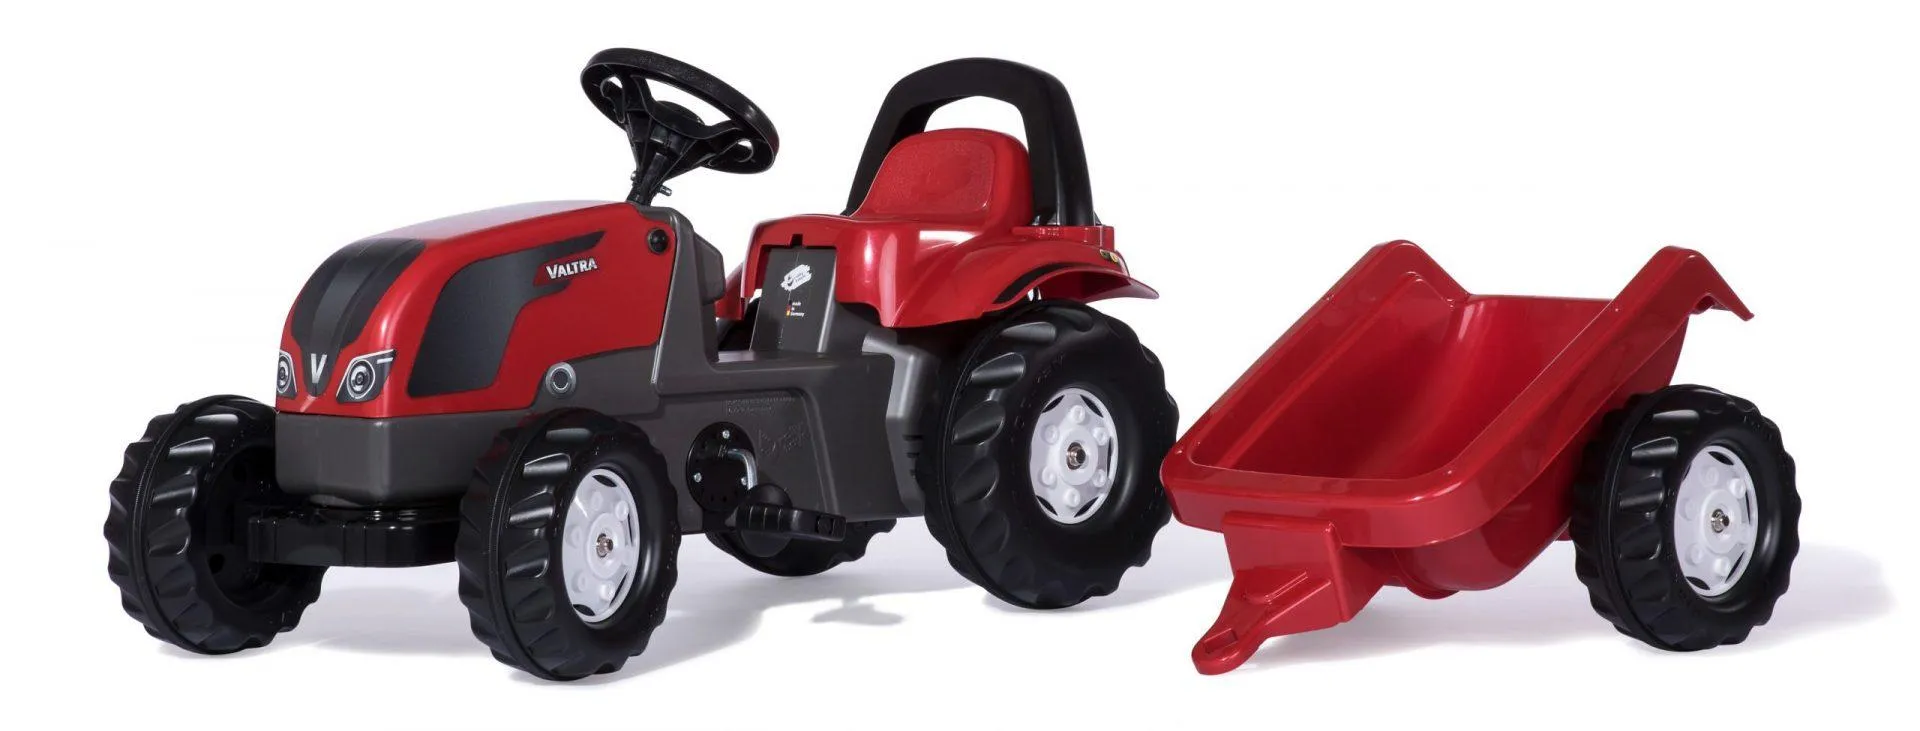 Rolly Valtra Kids Pedal Tractor with Trailer